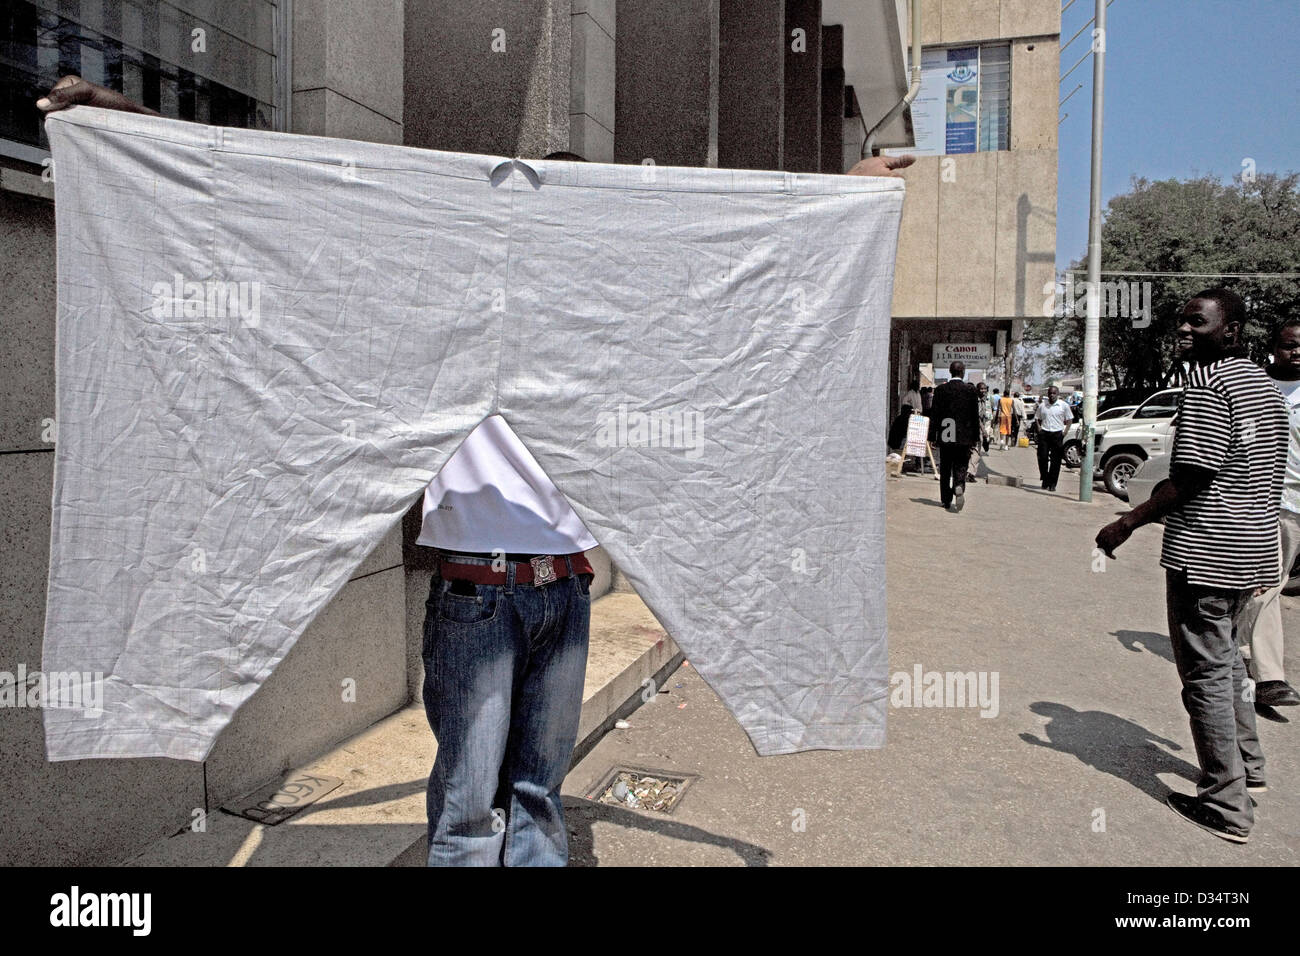 A street vendor in the capital of Zambia, Lusaka holding up a pair of large oversized pants he is hoping to sell. Stock Photo